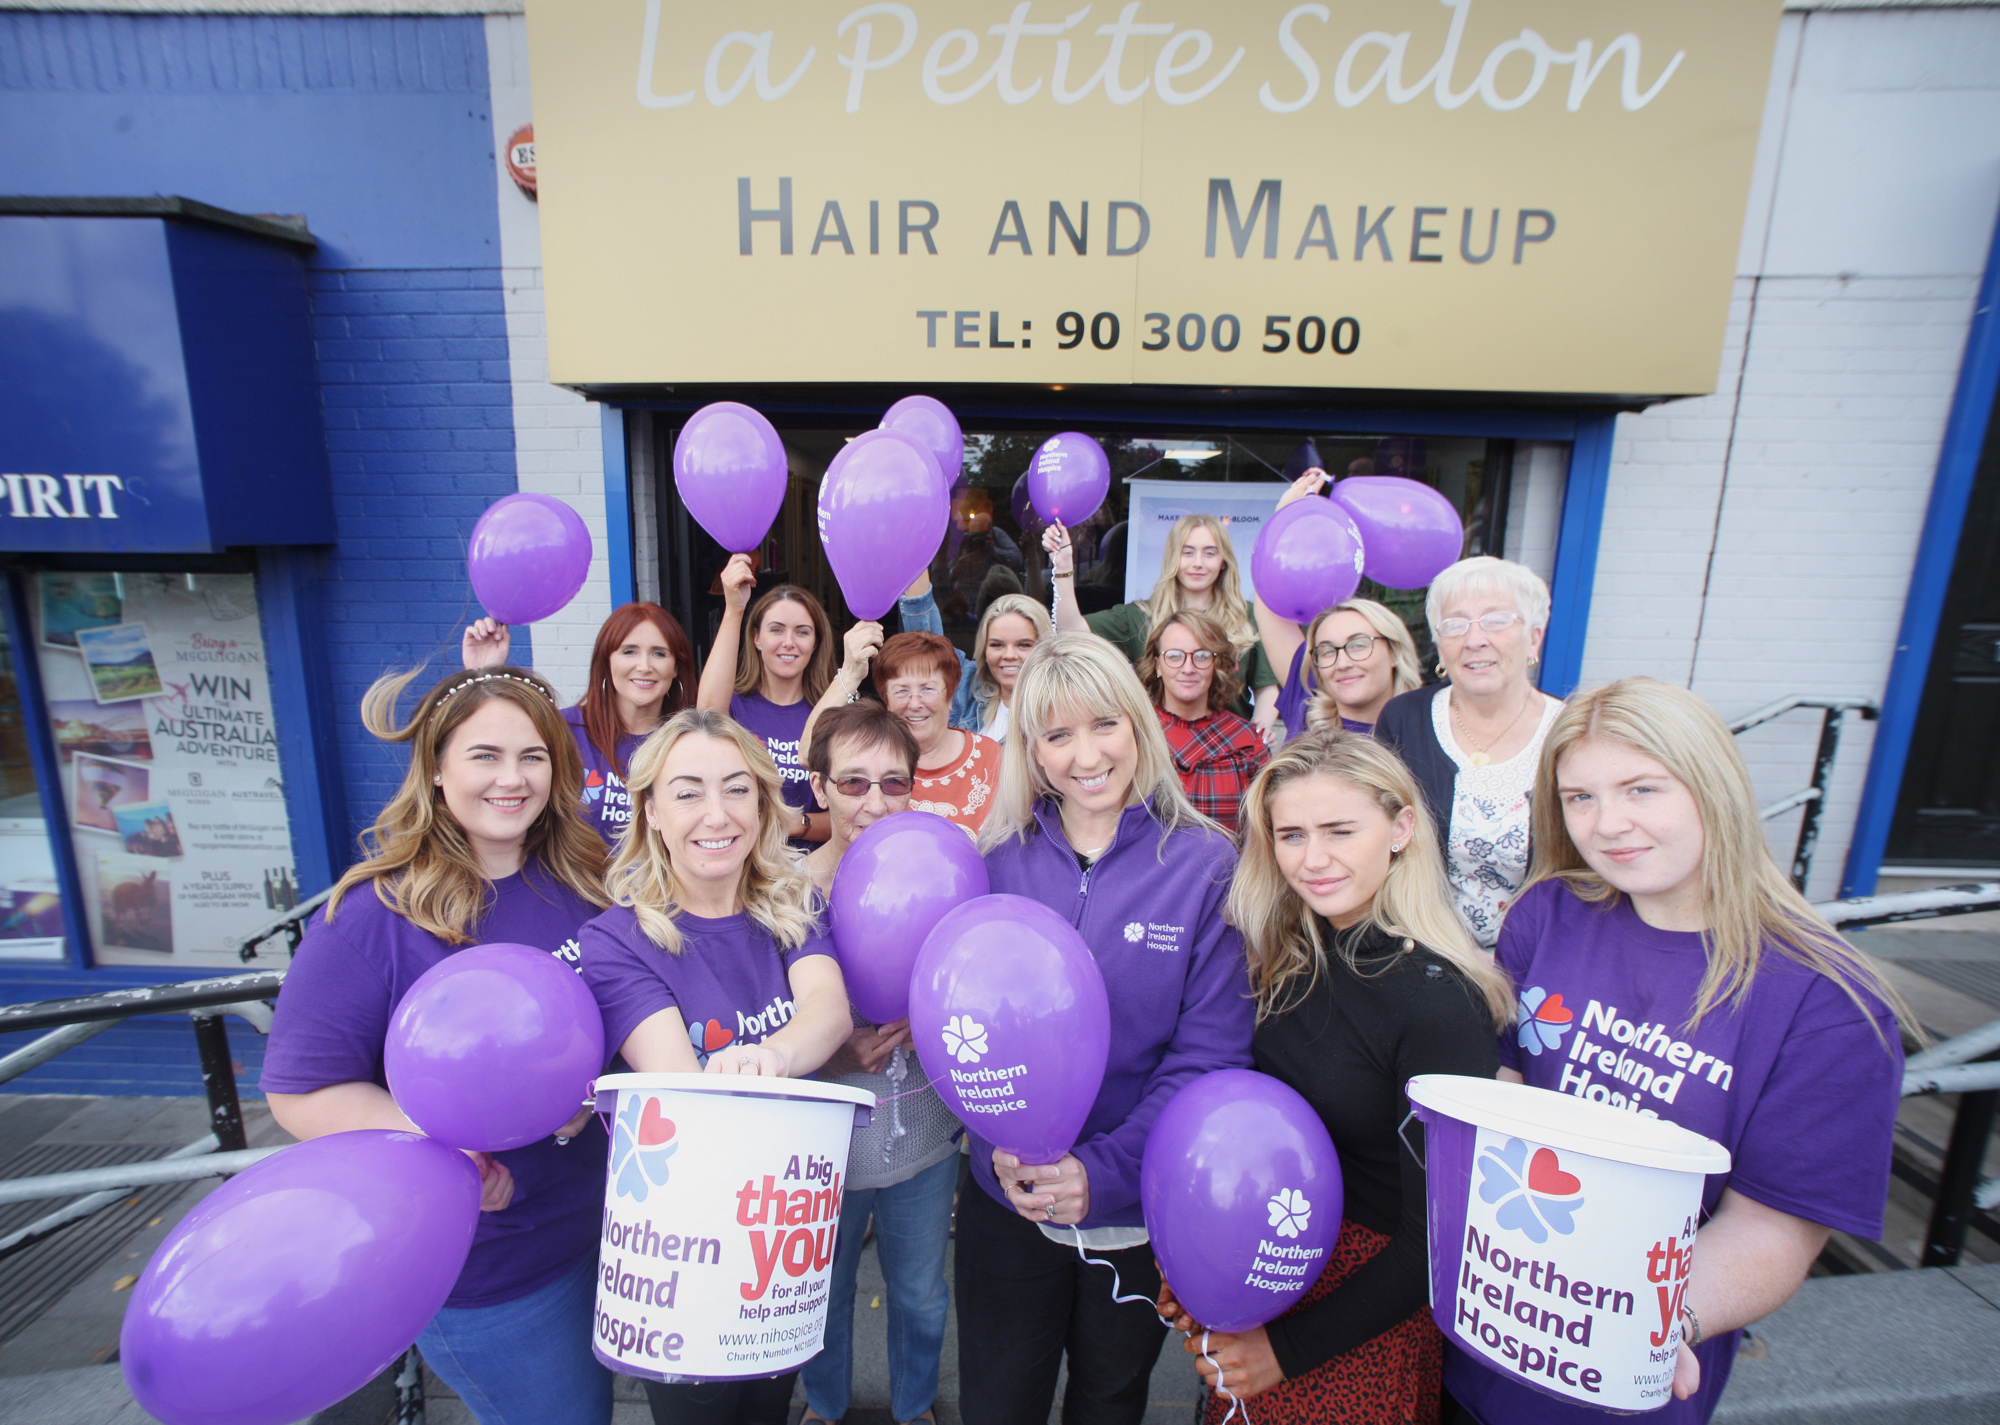 All smiles at a fundraiser in aid of the NI Hospice at La Petite Salon on the Suffolk Road